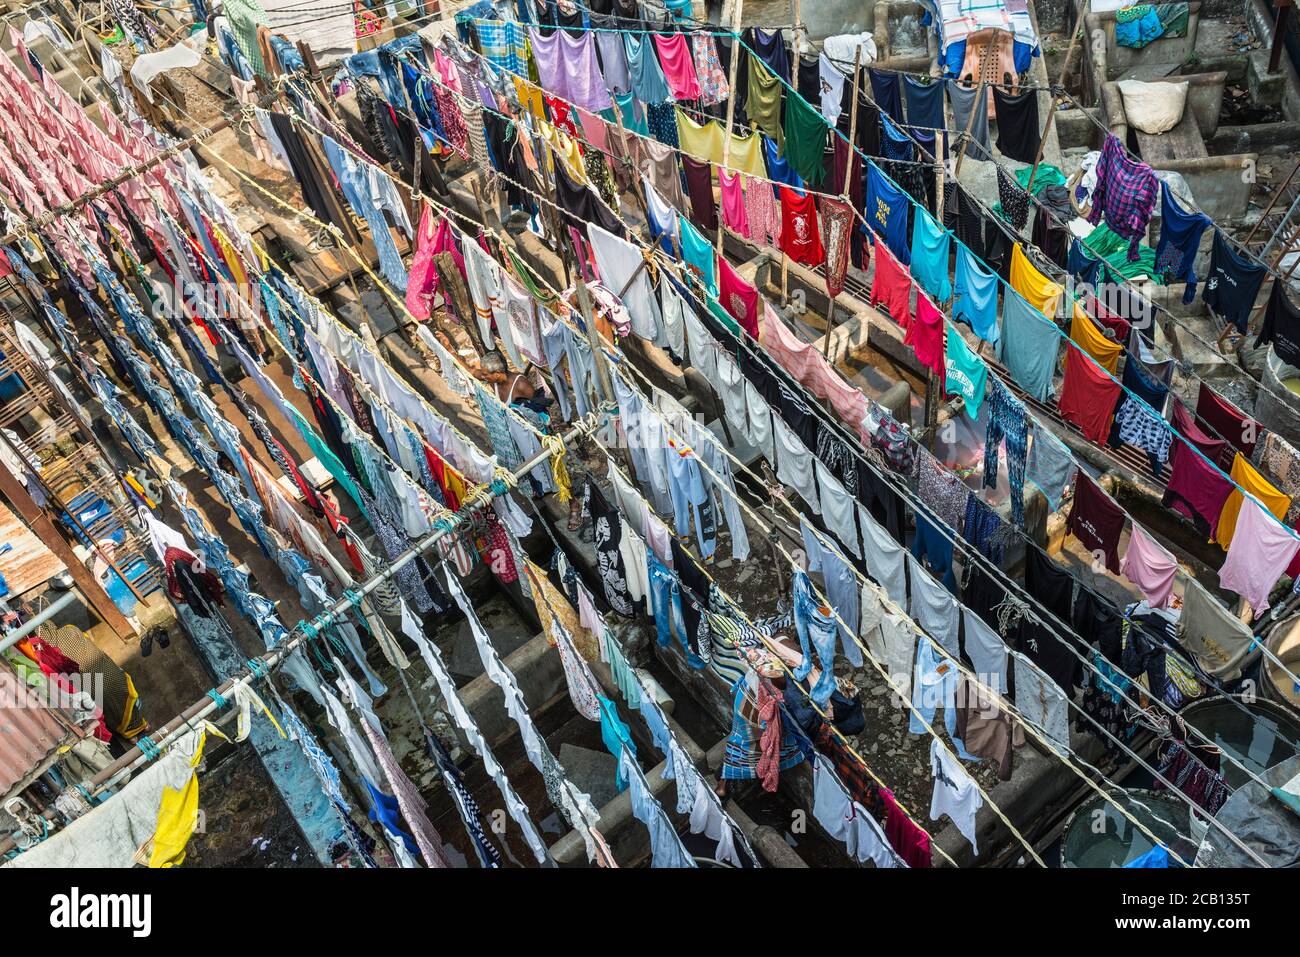 Mumbai, India - November 22, 2019: Colourful shirts and clothes hanging to dry at Dhobi Ghats central laundry.  It was constructed in 1890. Stock Photo